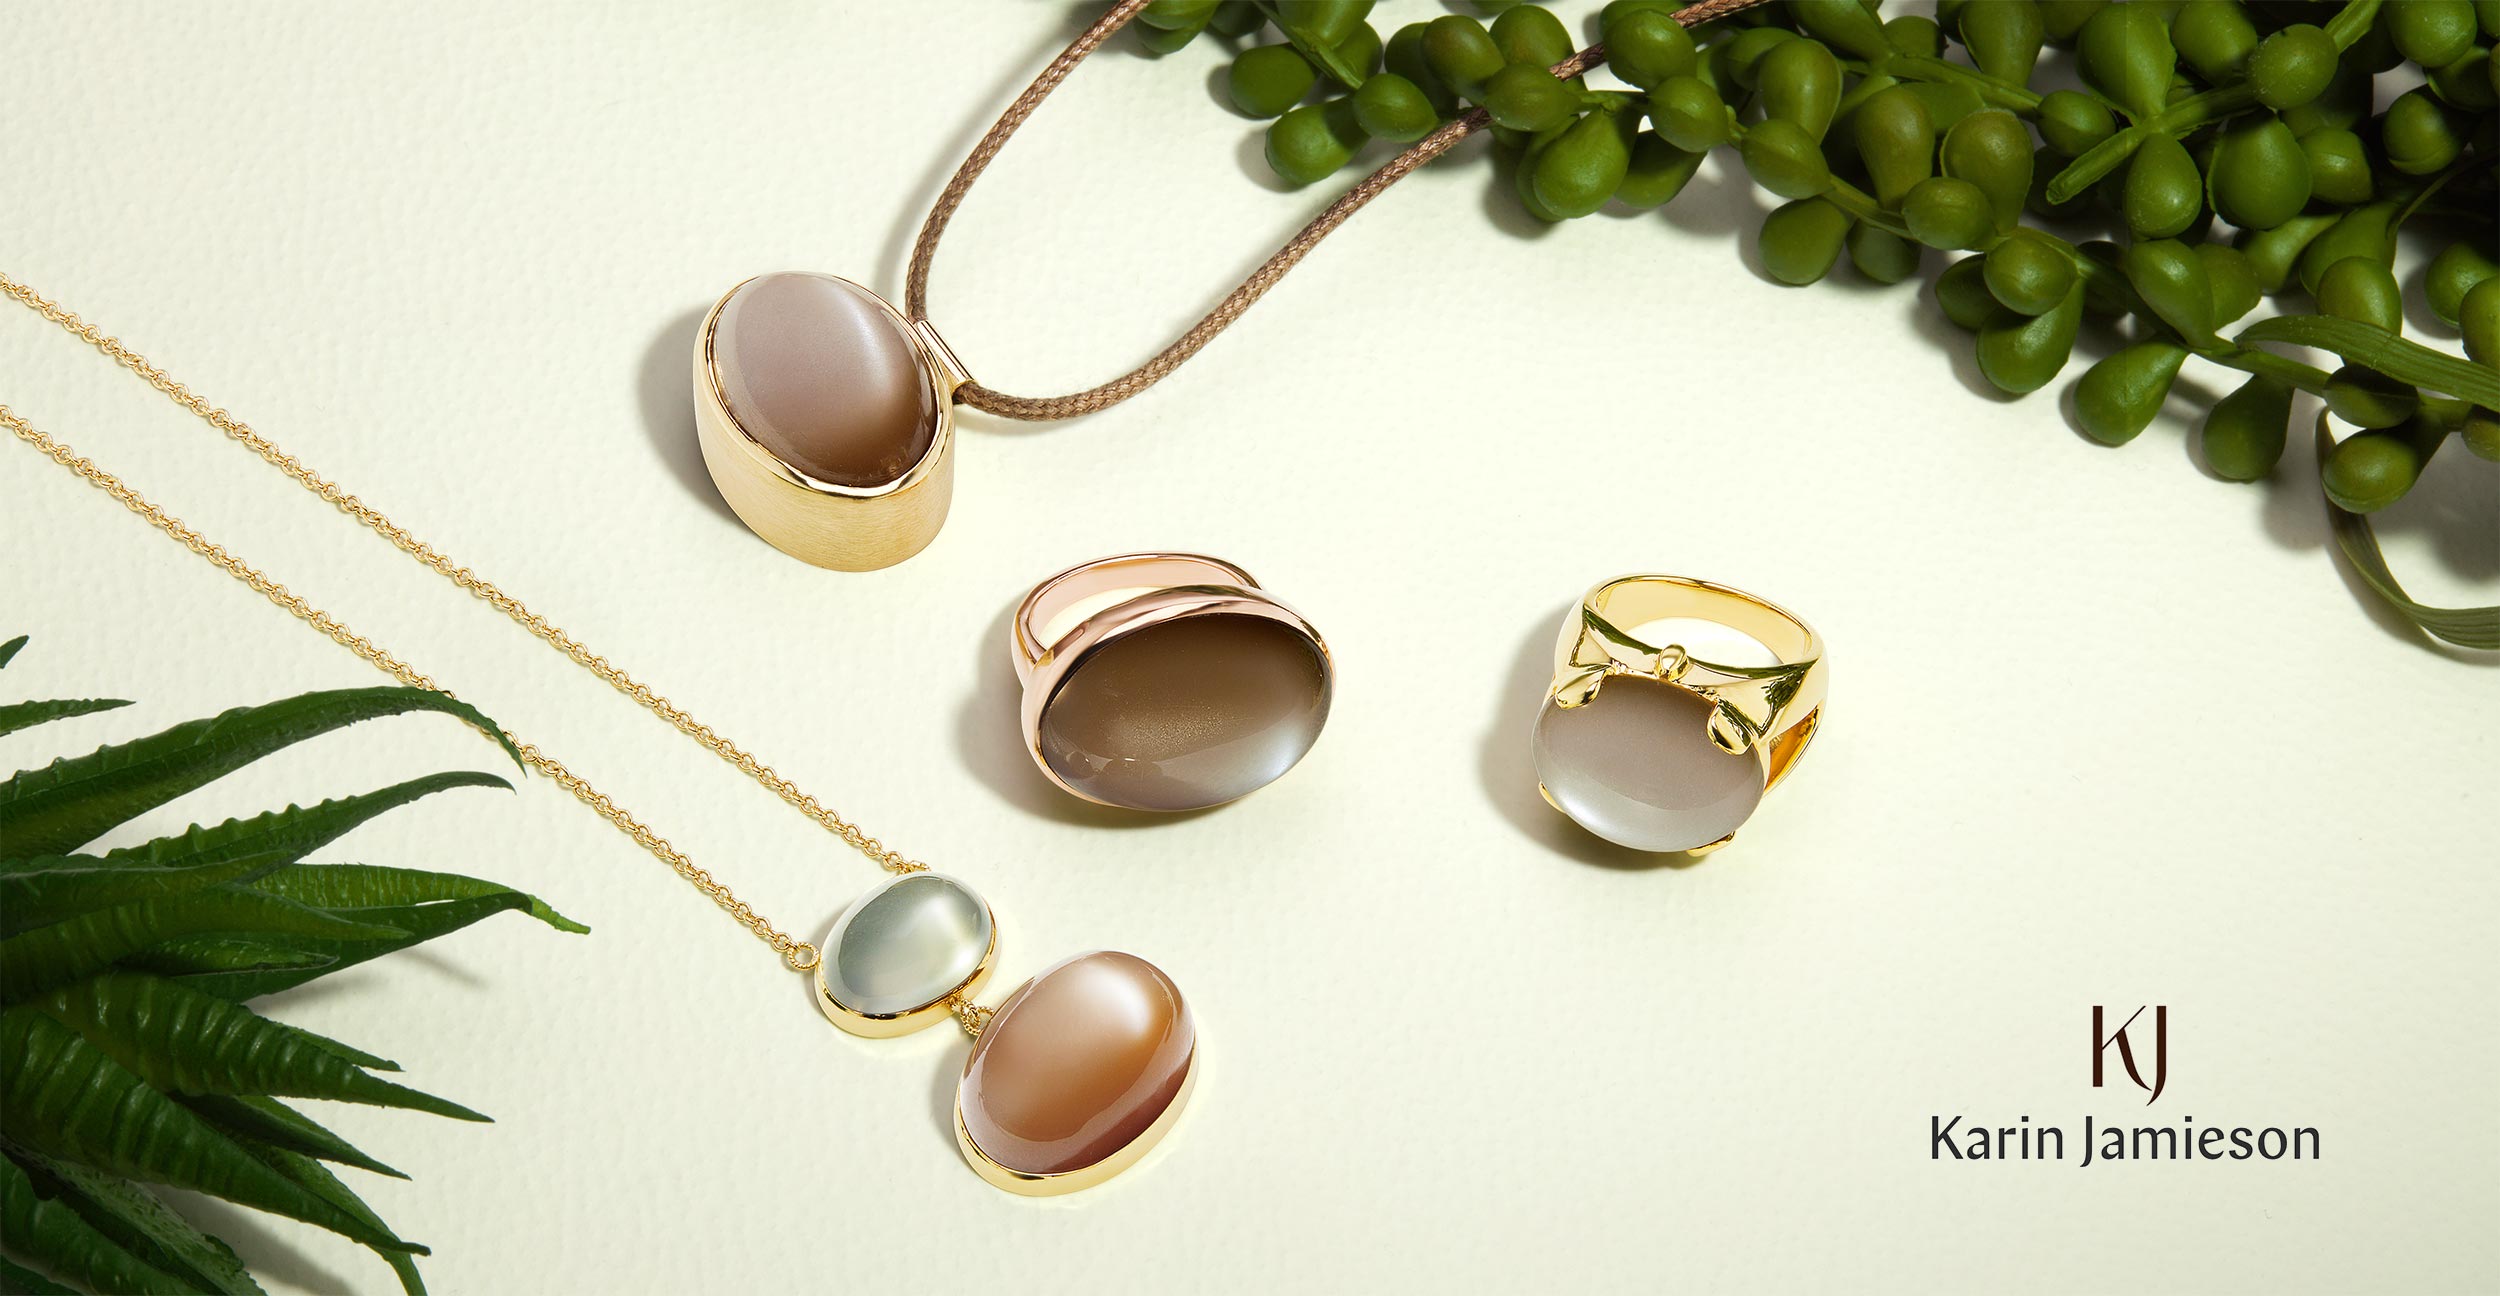 New York commercial jewelry photographer, still life photography Karin Jamieson necklace ring group